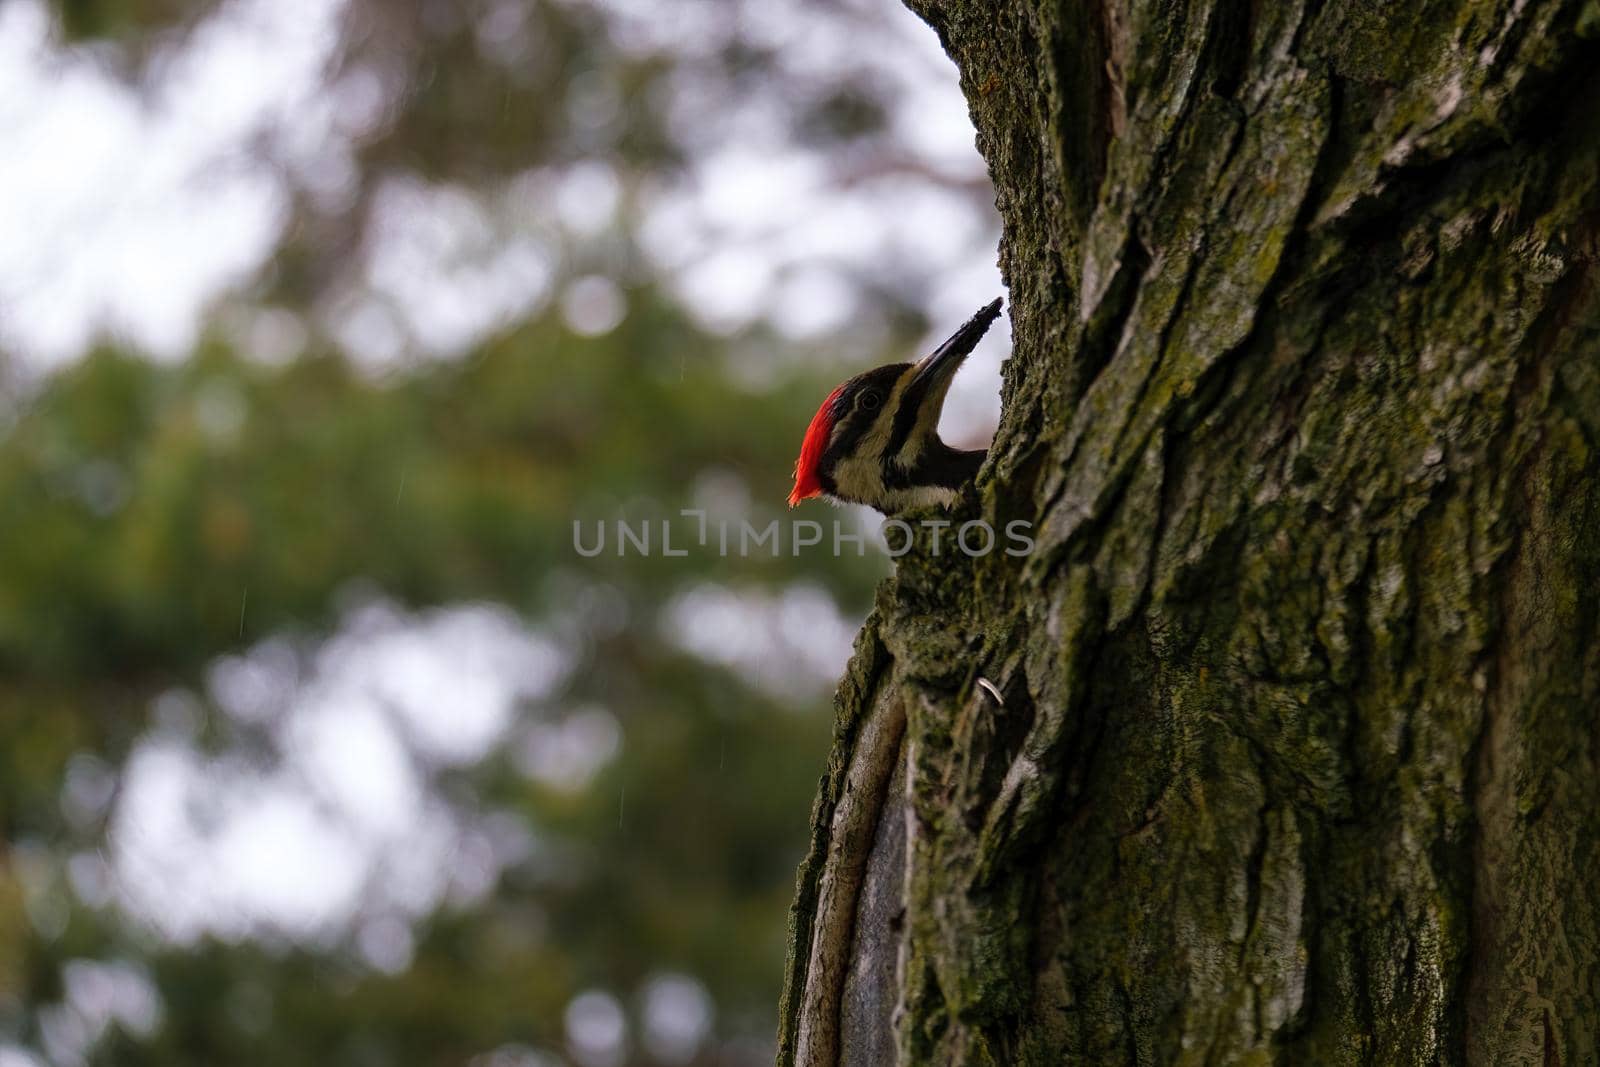 The head of a pileated woodpecker (Dryocopus pileatus) peeks out from the side of a tree on a rainy day.